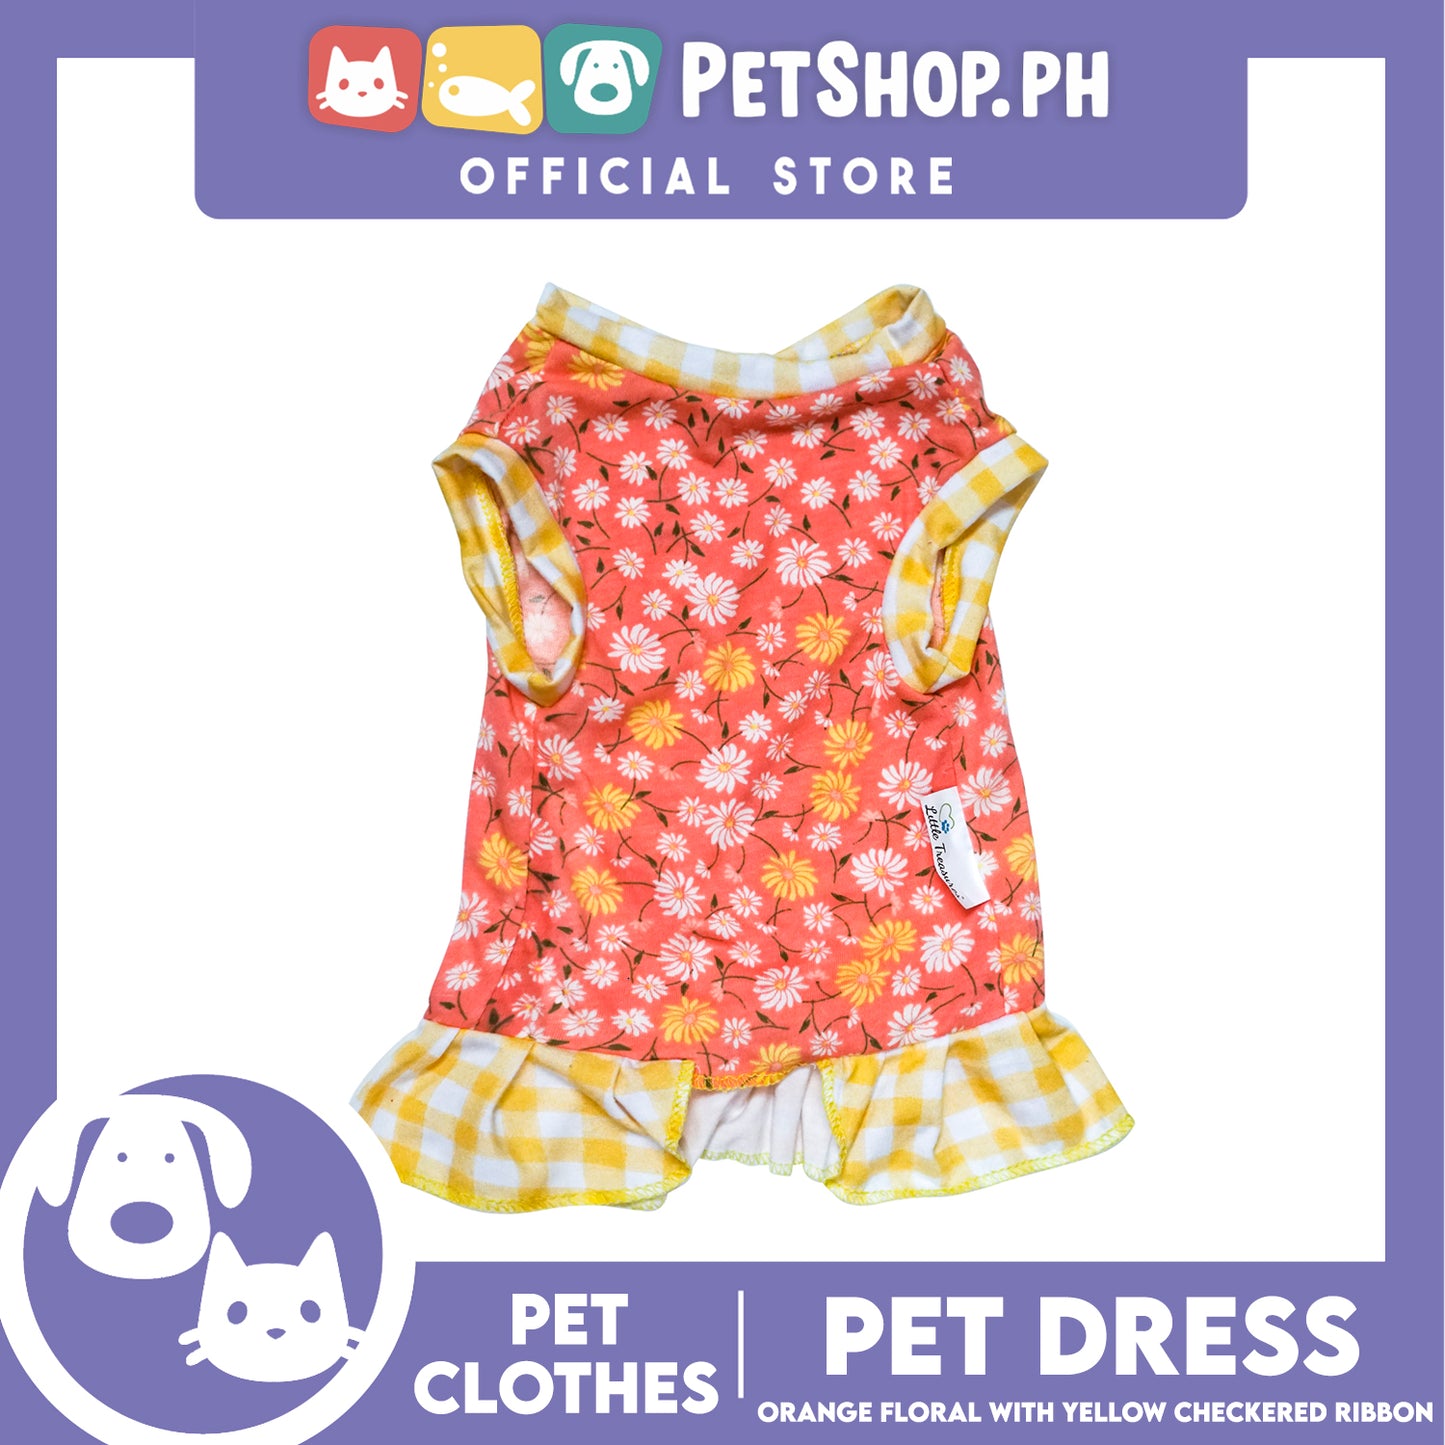 Pet Dress Orange Floral Yellow Checkered with Ribbon (Large) Pet Dress Clothes Perfect for Dogs